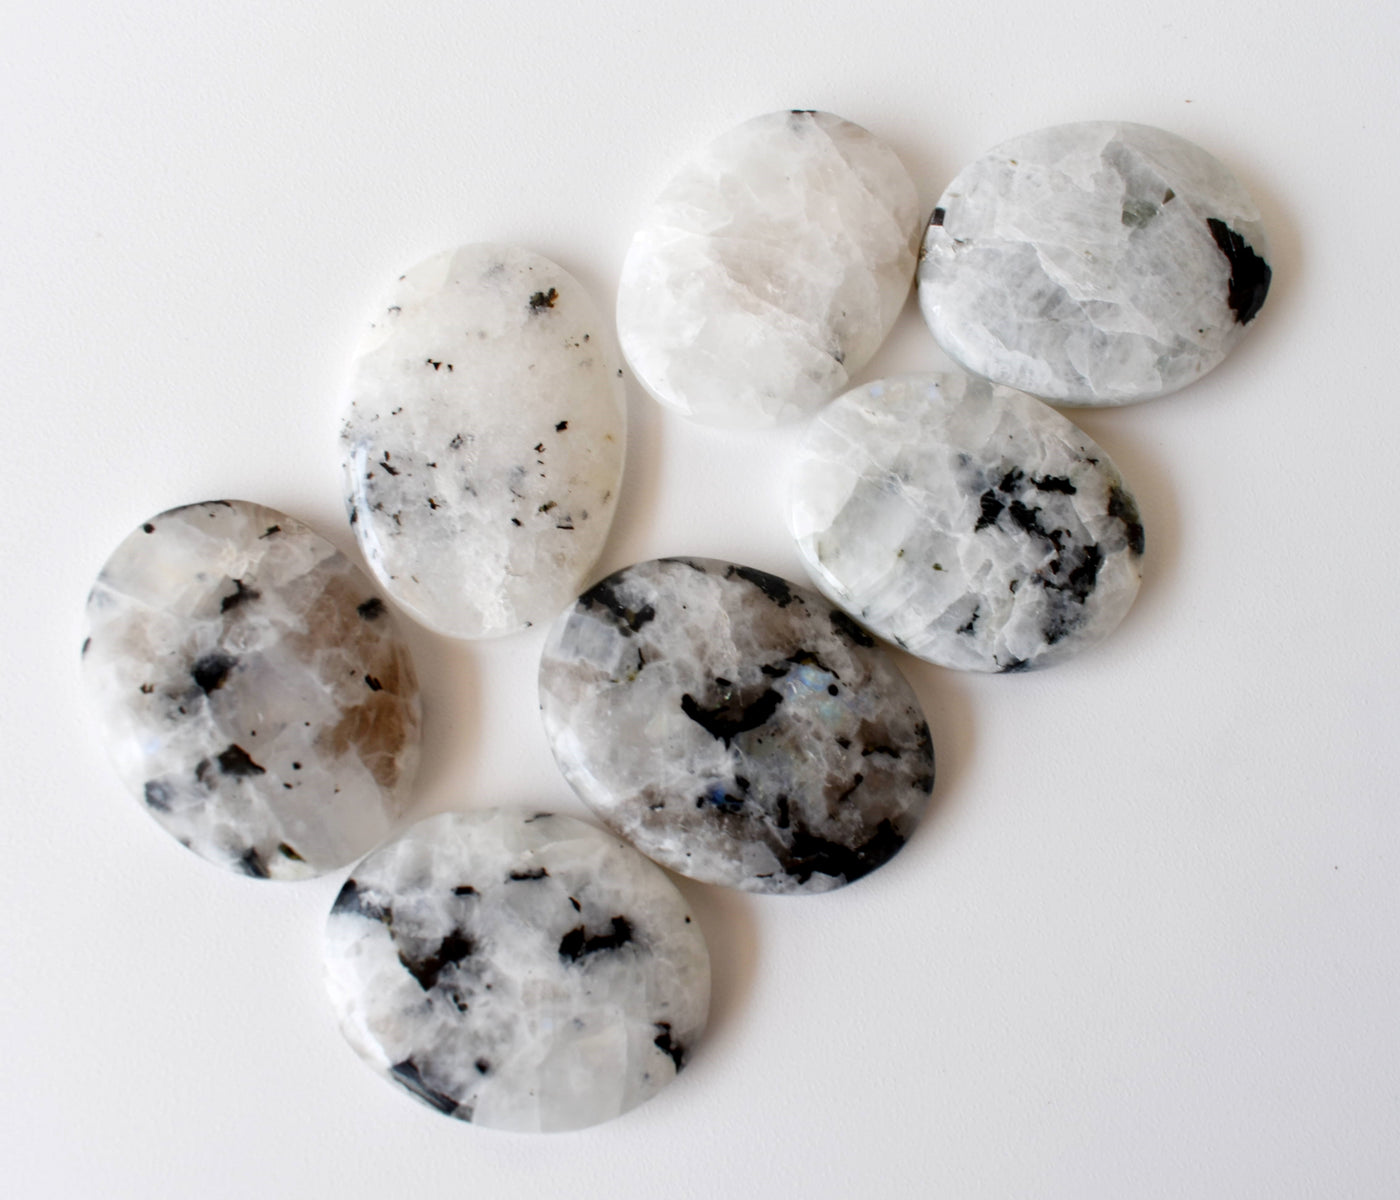 Rainbow Moonstone Worry Stones (Compassion and Psychic Abilities)